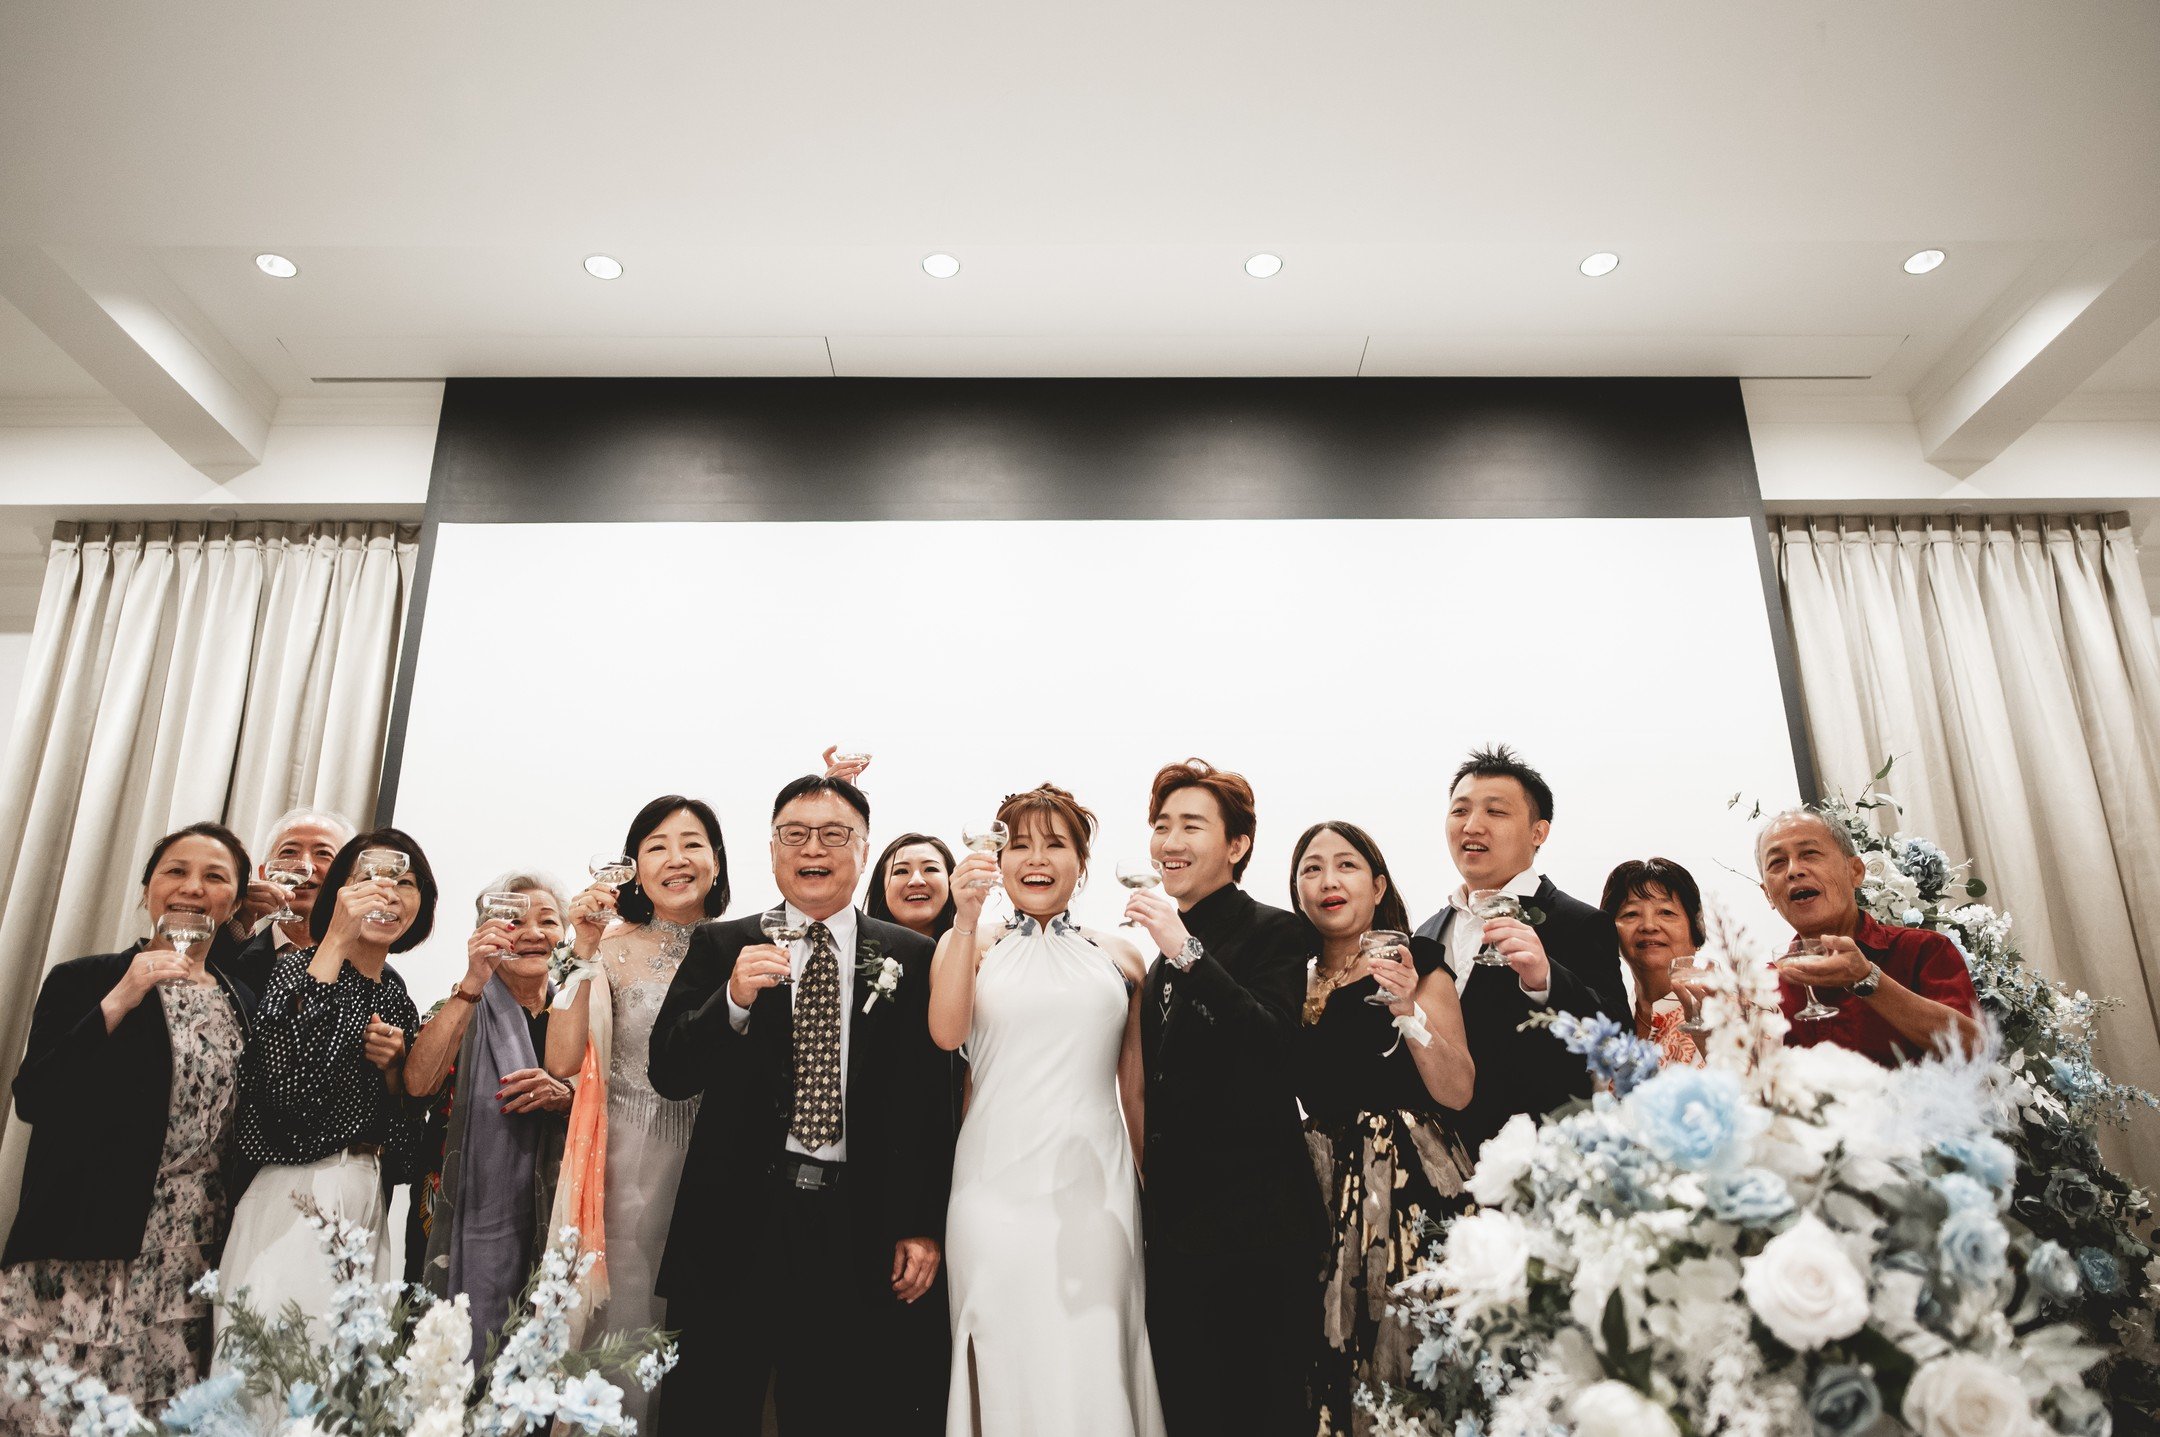 Cerebrating Dale&amp;Christie Wedding

Photo : Arsh @luvpersecond
Make Up @arieltistry @carchan.makeup
For enquiry, contact us at +65 83990229
mail@luvpersecond.com
#singaporewedding #weddingphotography #sgwedding #singaporeprewedding #singaporeweddi